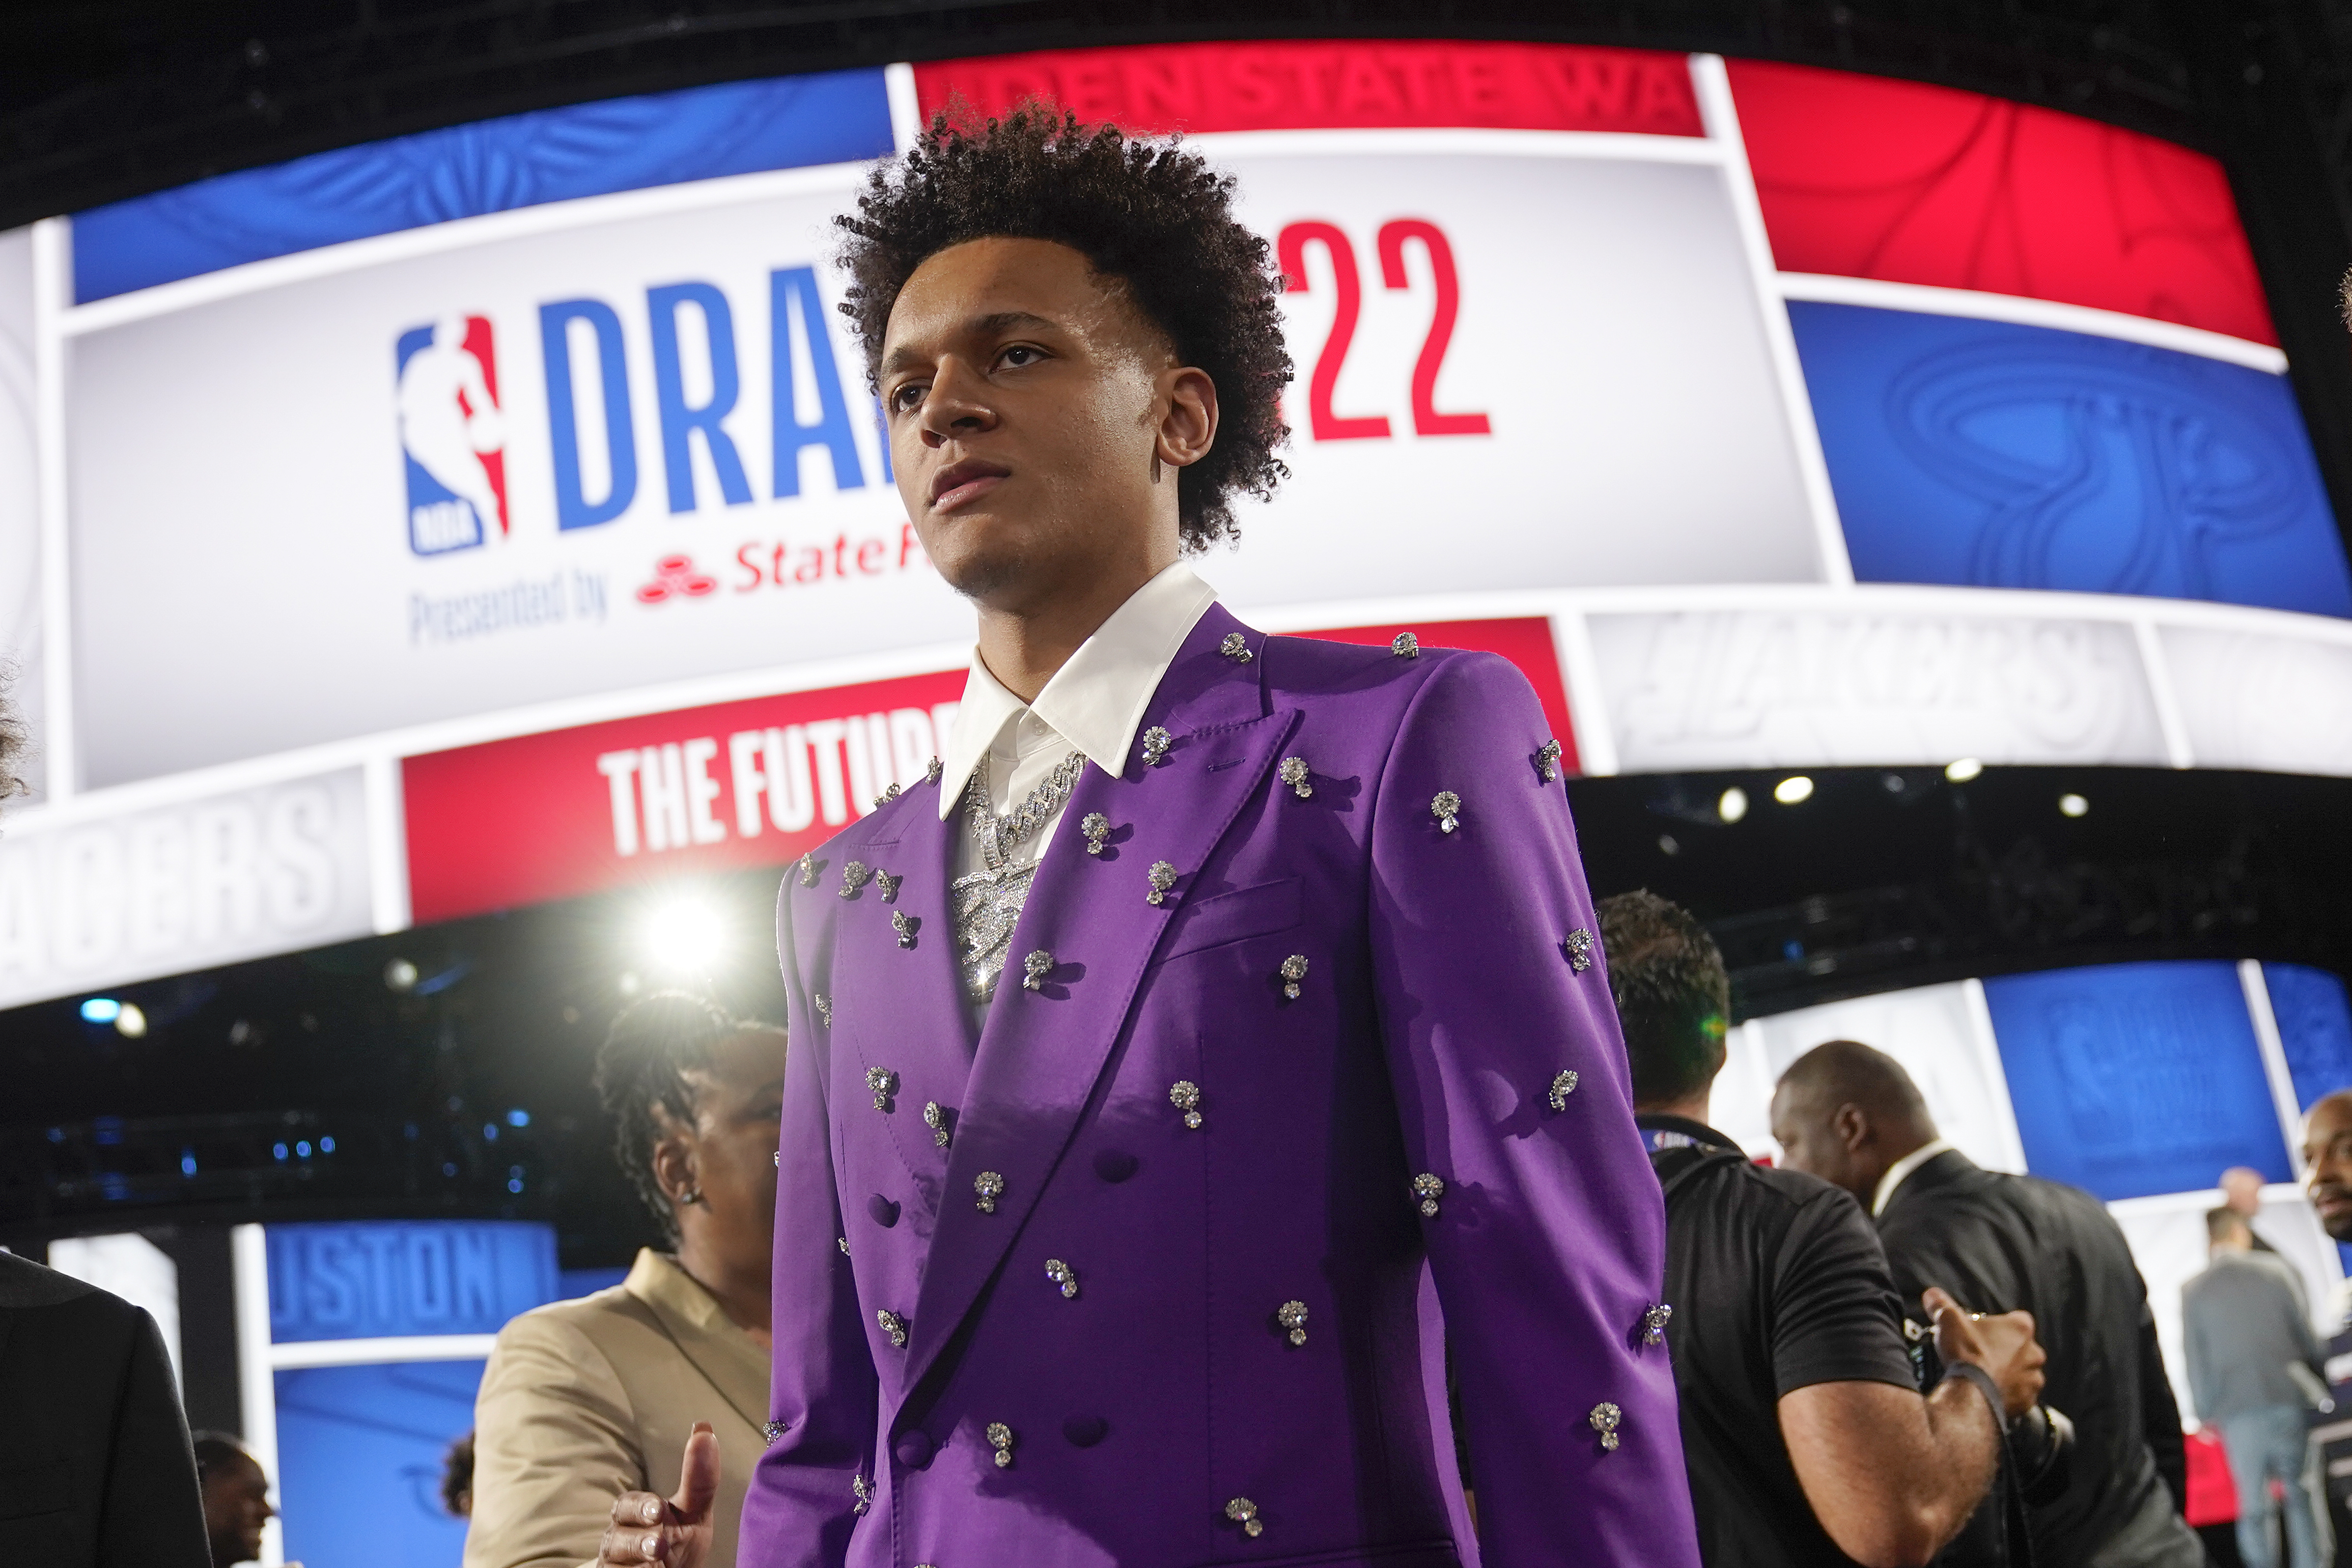 Paolo Banchero, 2022 NBA Draft prospects show off fashion sense with  draft-day suits